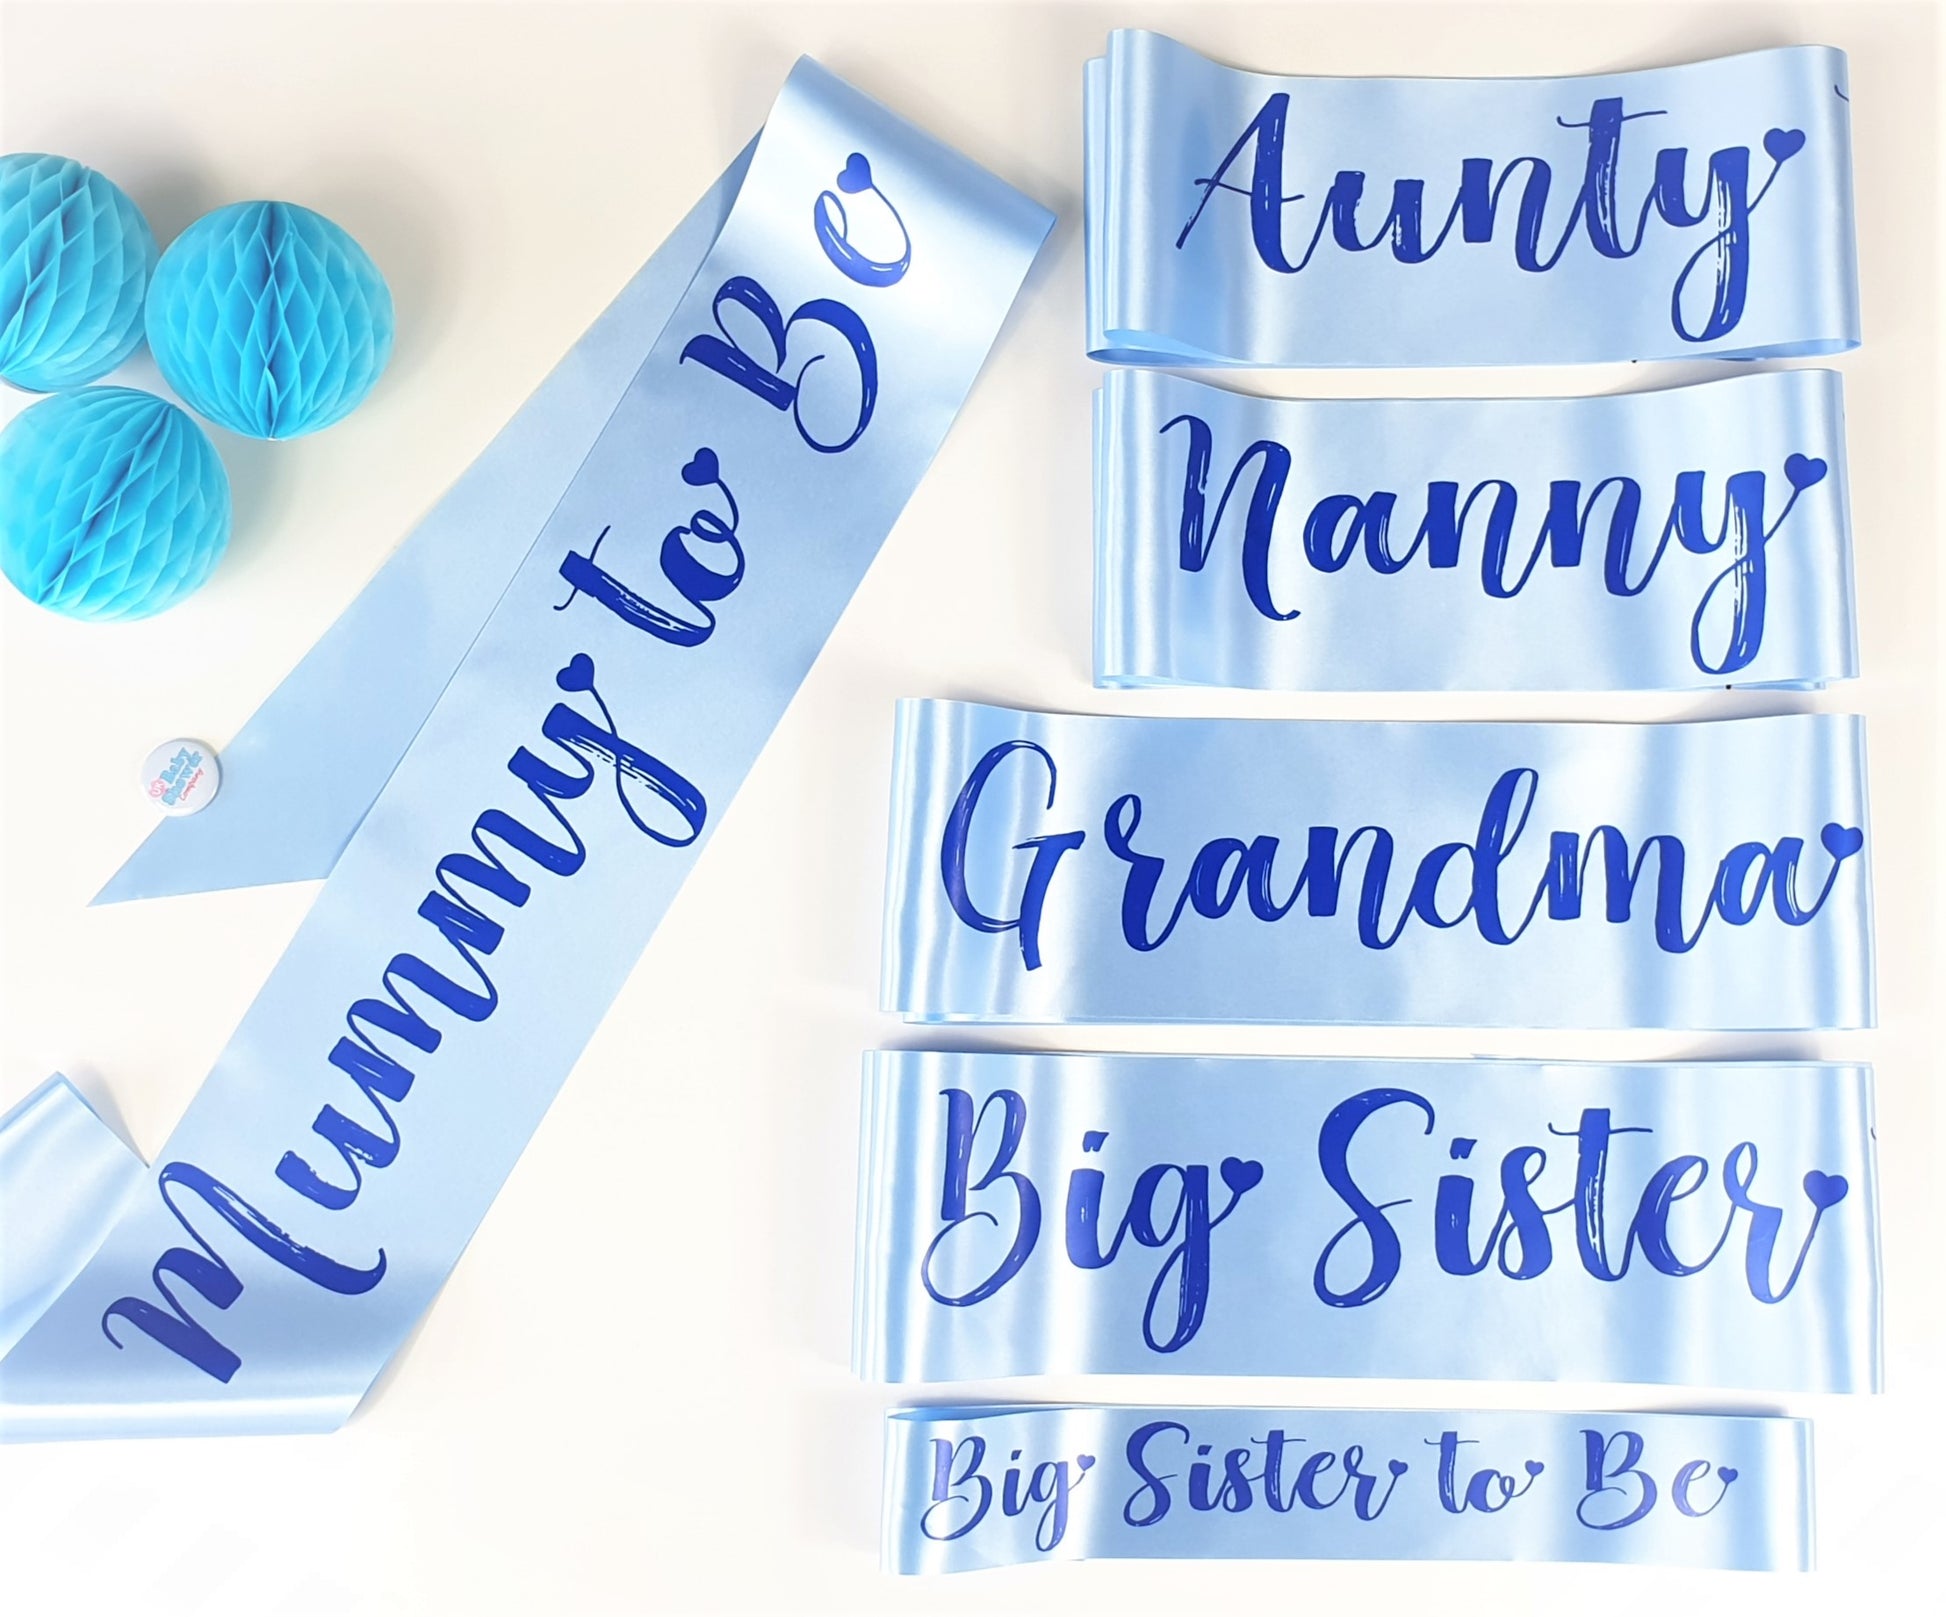 Big Sister to Be Sash Small - Blue - Uk Baby Shower Co ltd